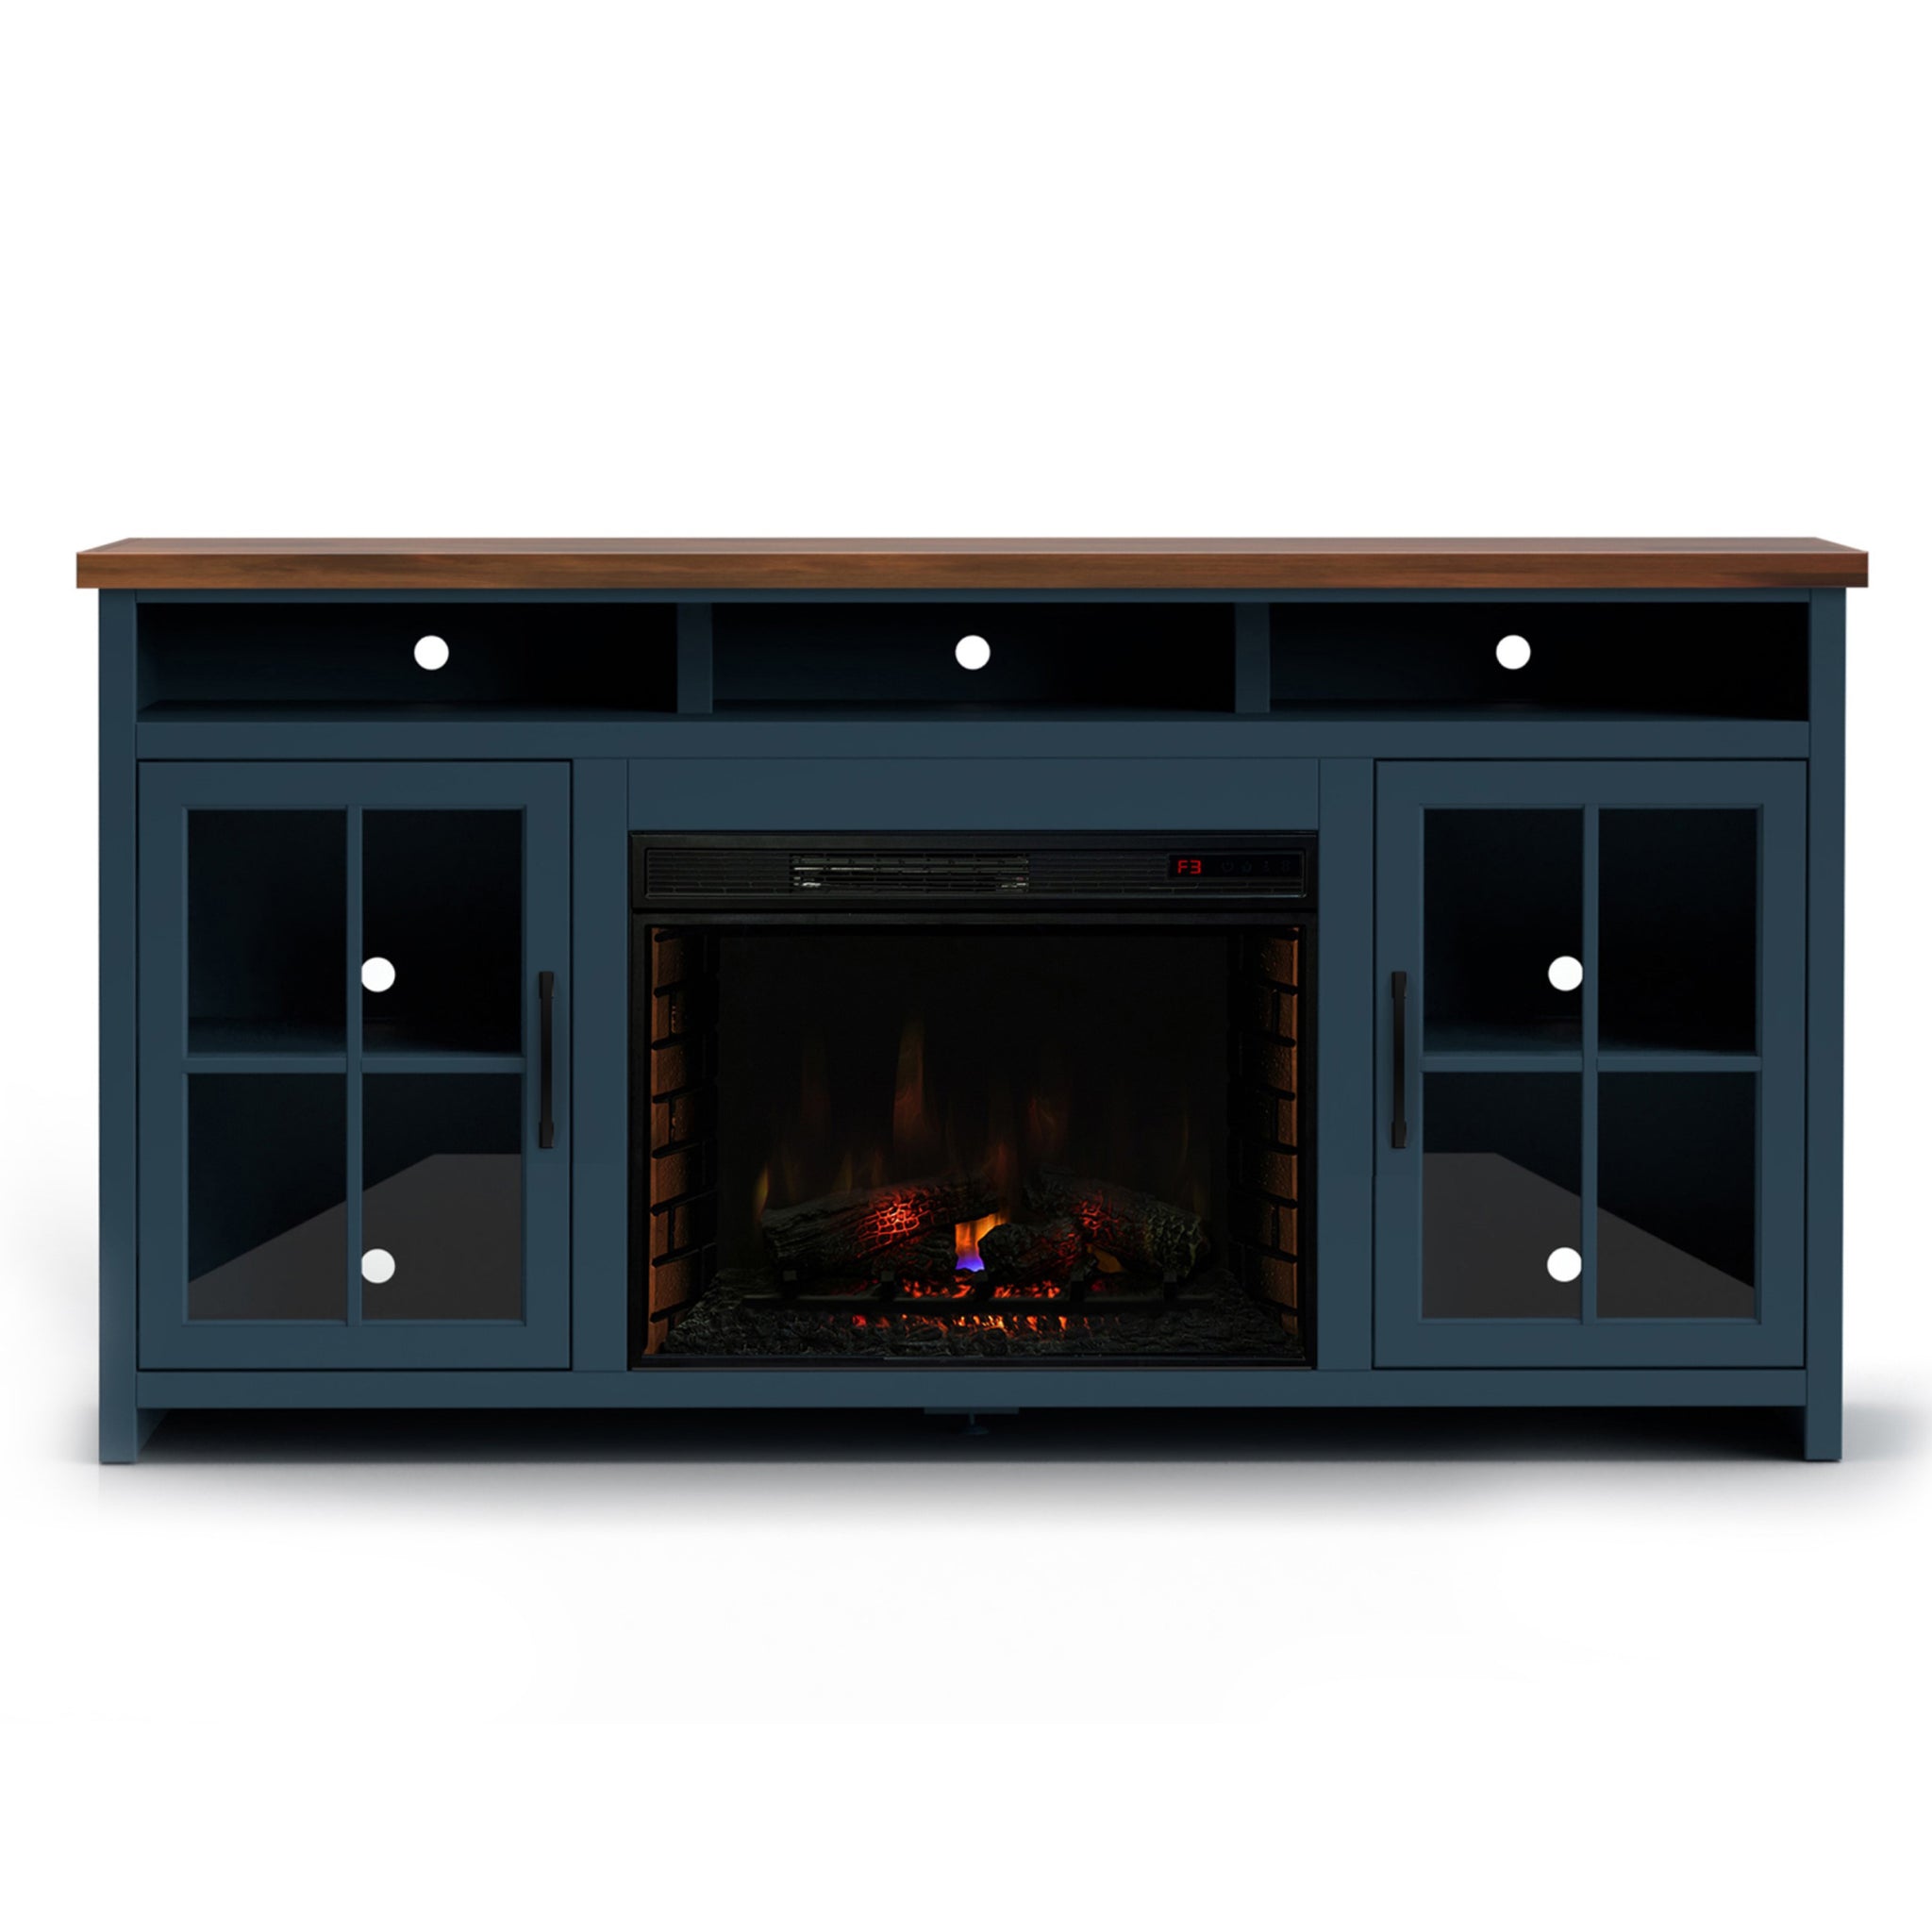 Nantucket 74 inch Fireplace TV Stand up to 40-electric-no-blue-400-vent free-primary